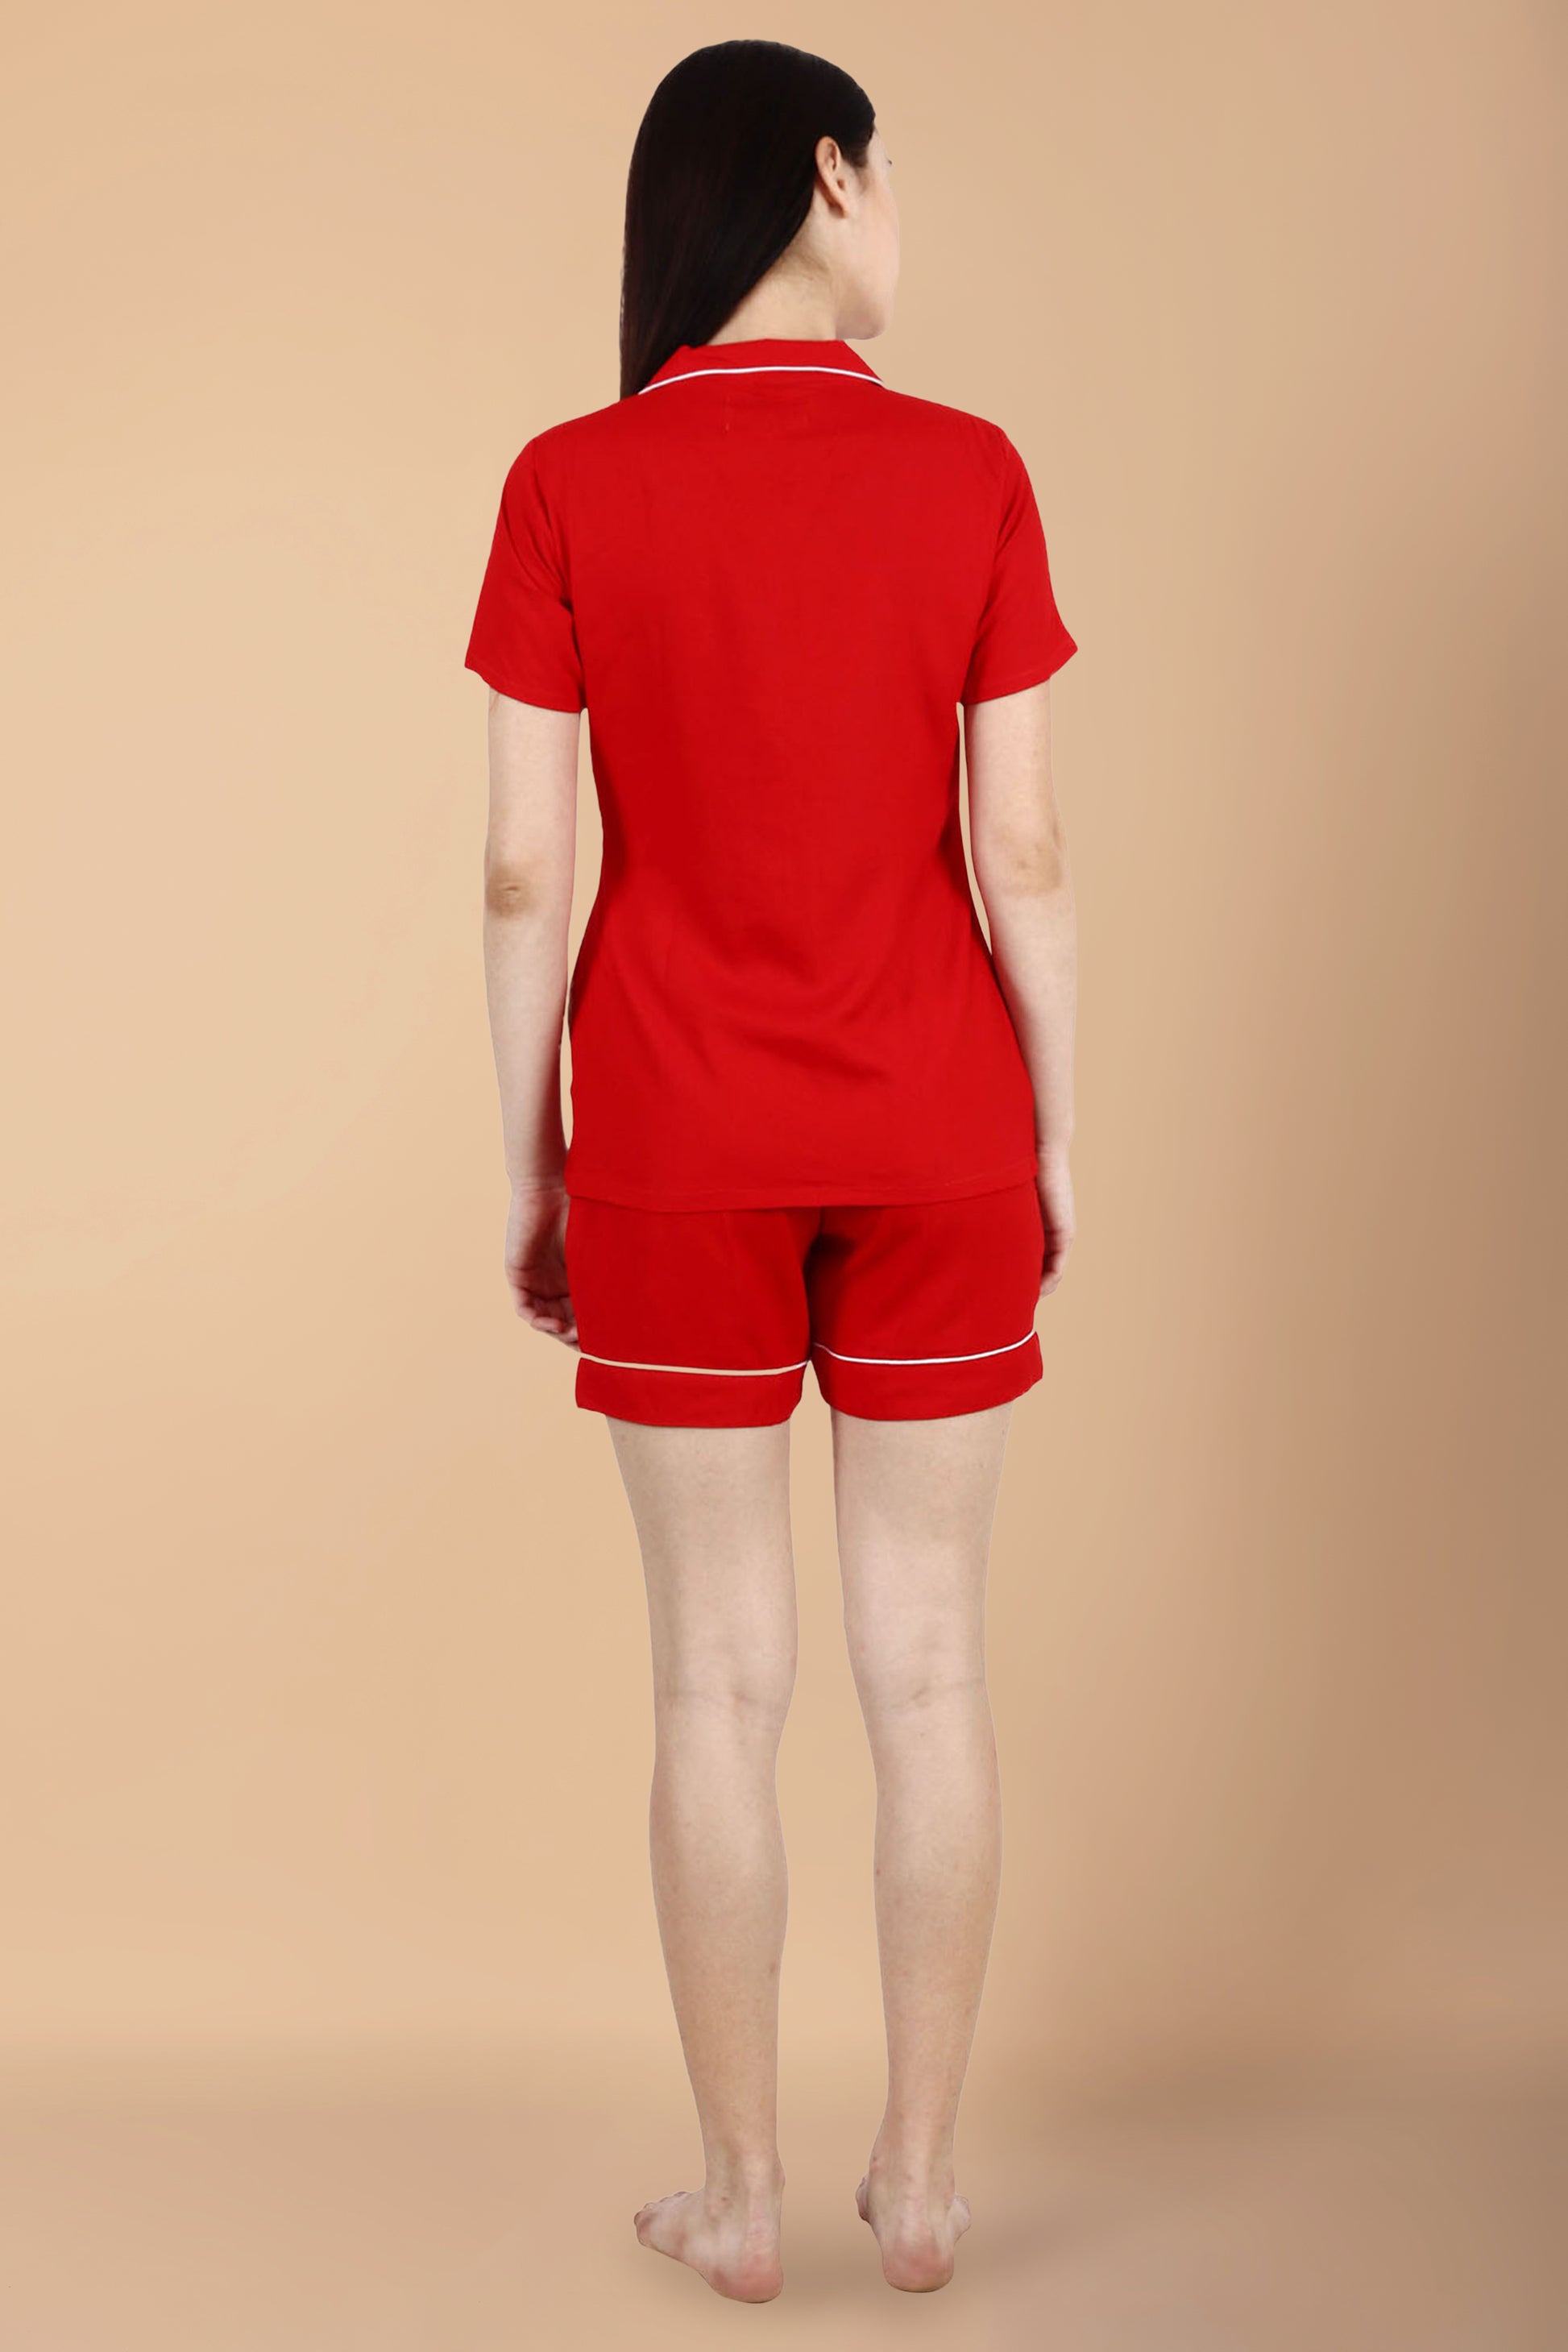 Solid Red Shorts Suit | Apella.